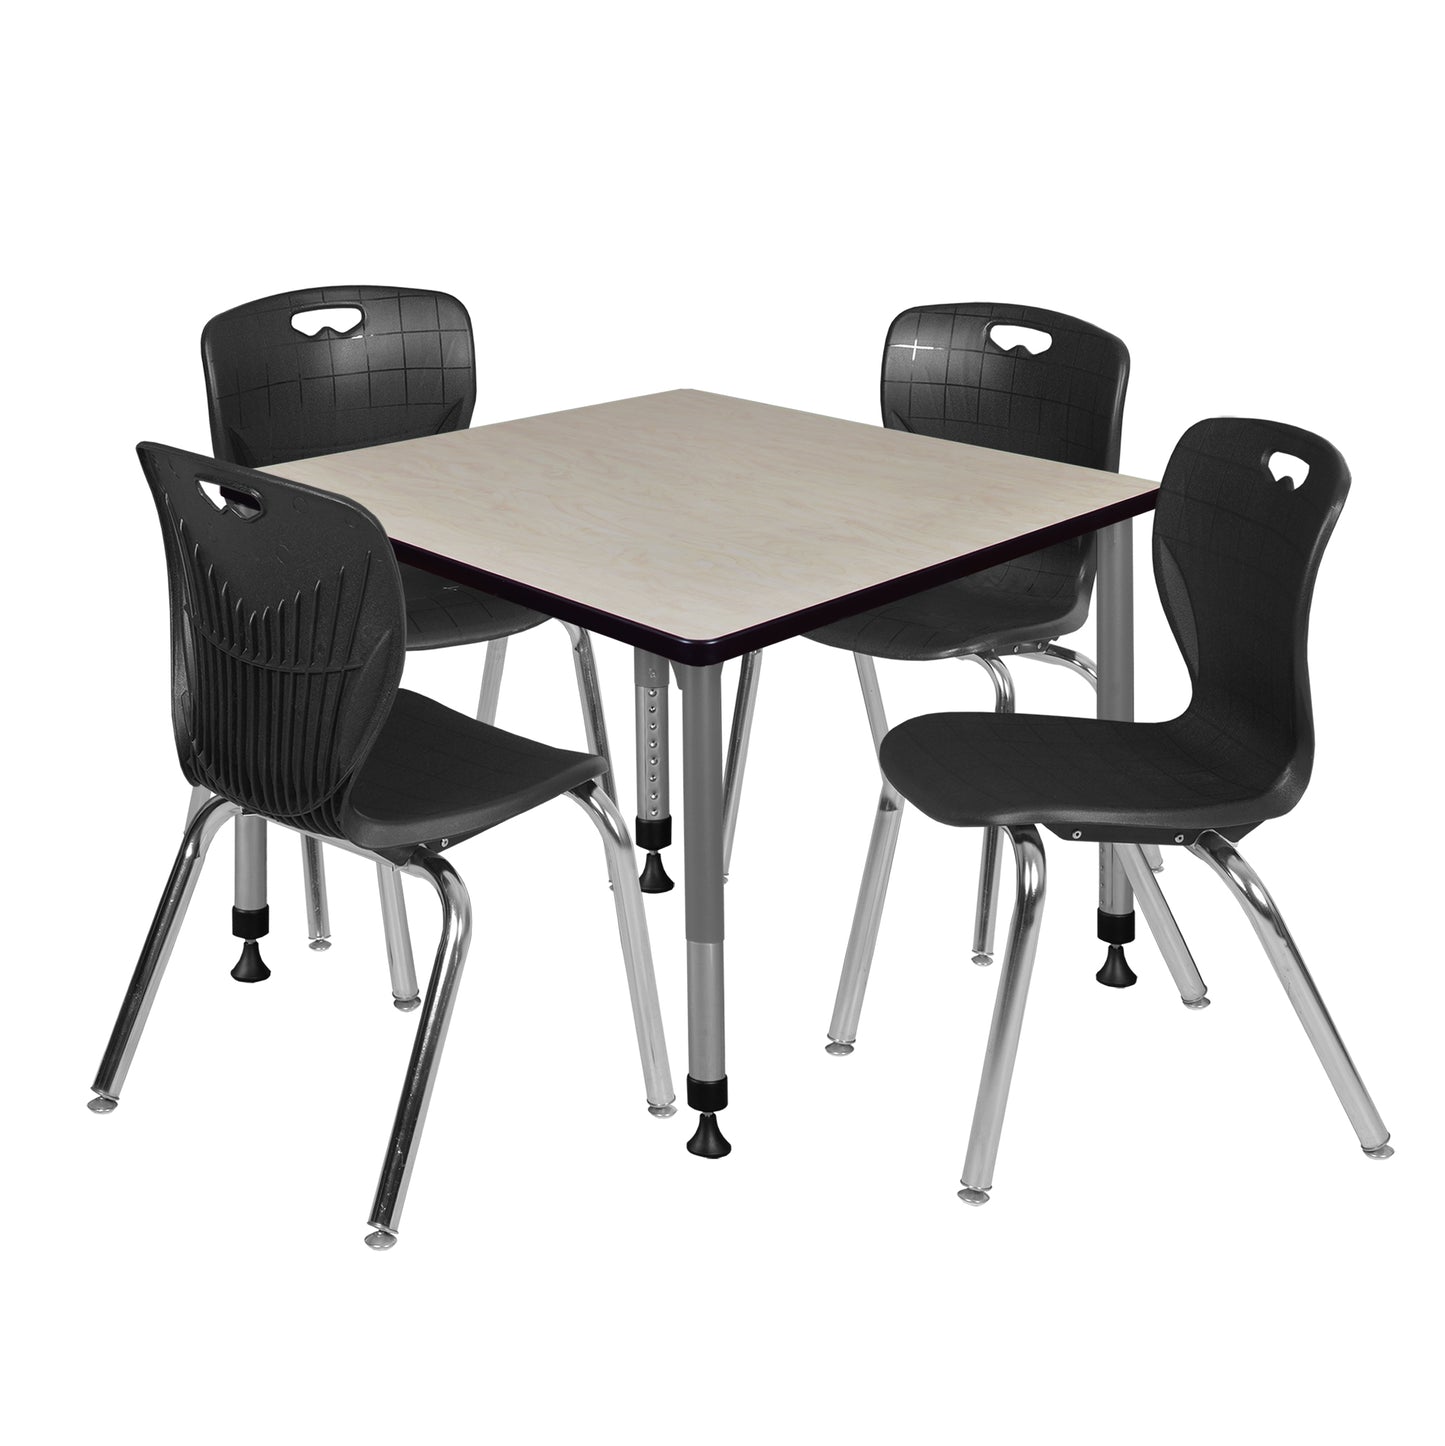 Regency Kee 36 in. Square Adjustable Classroom Table & 4 Andy 18 in. Stack Chairs